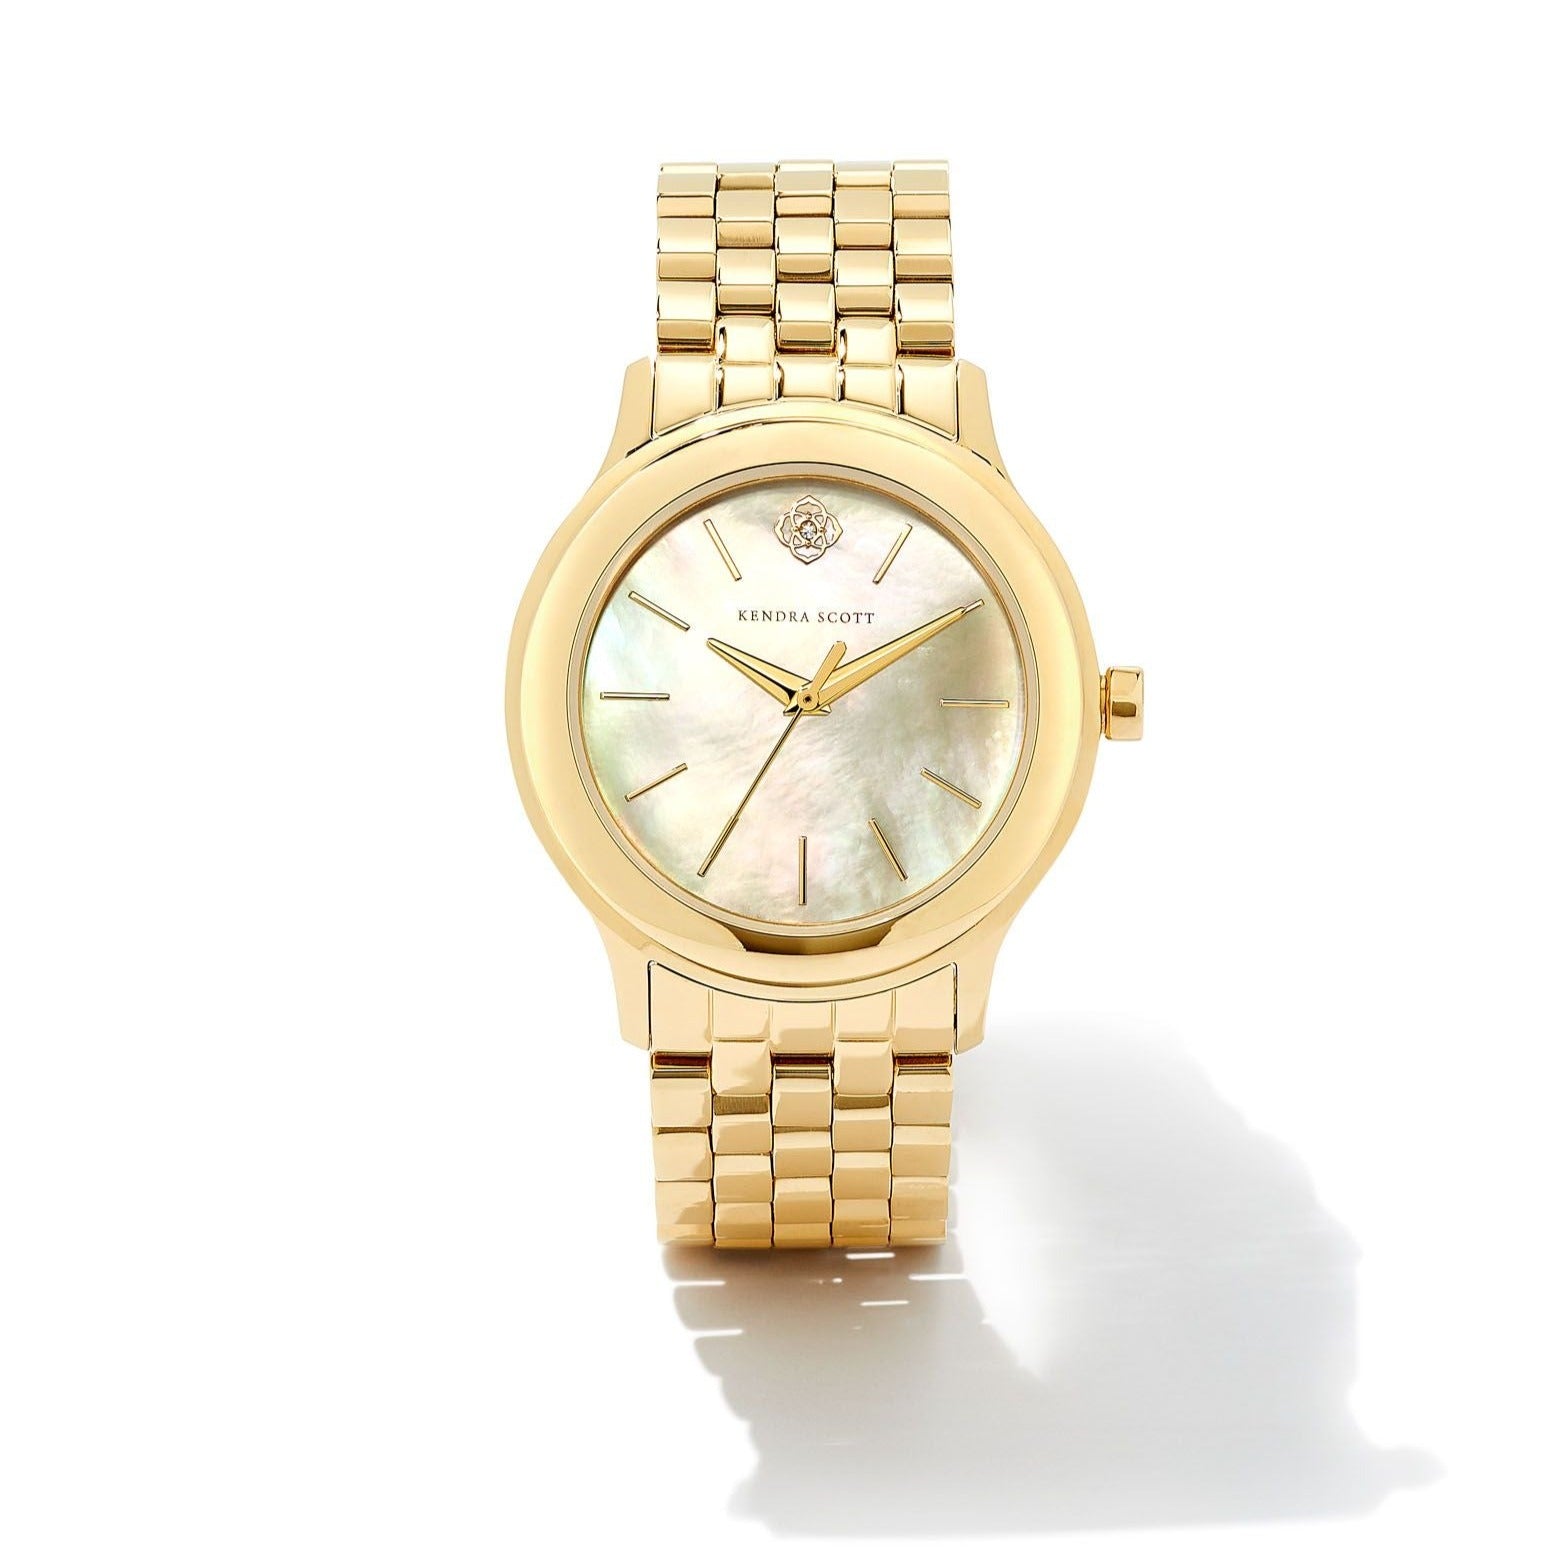 Kendra Scott | Alex Gold Tone Stainless Steel 35mm Watch in Ivory Mother-of-Pearl